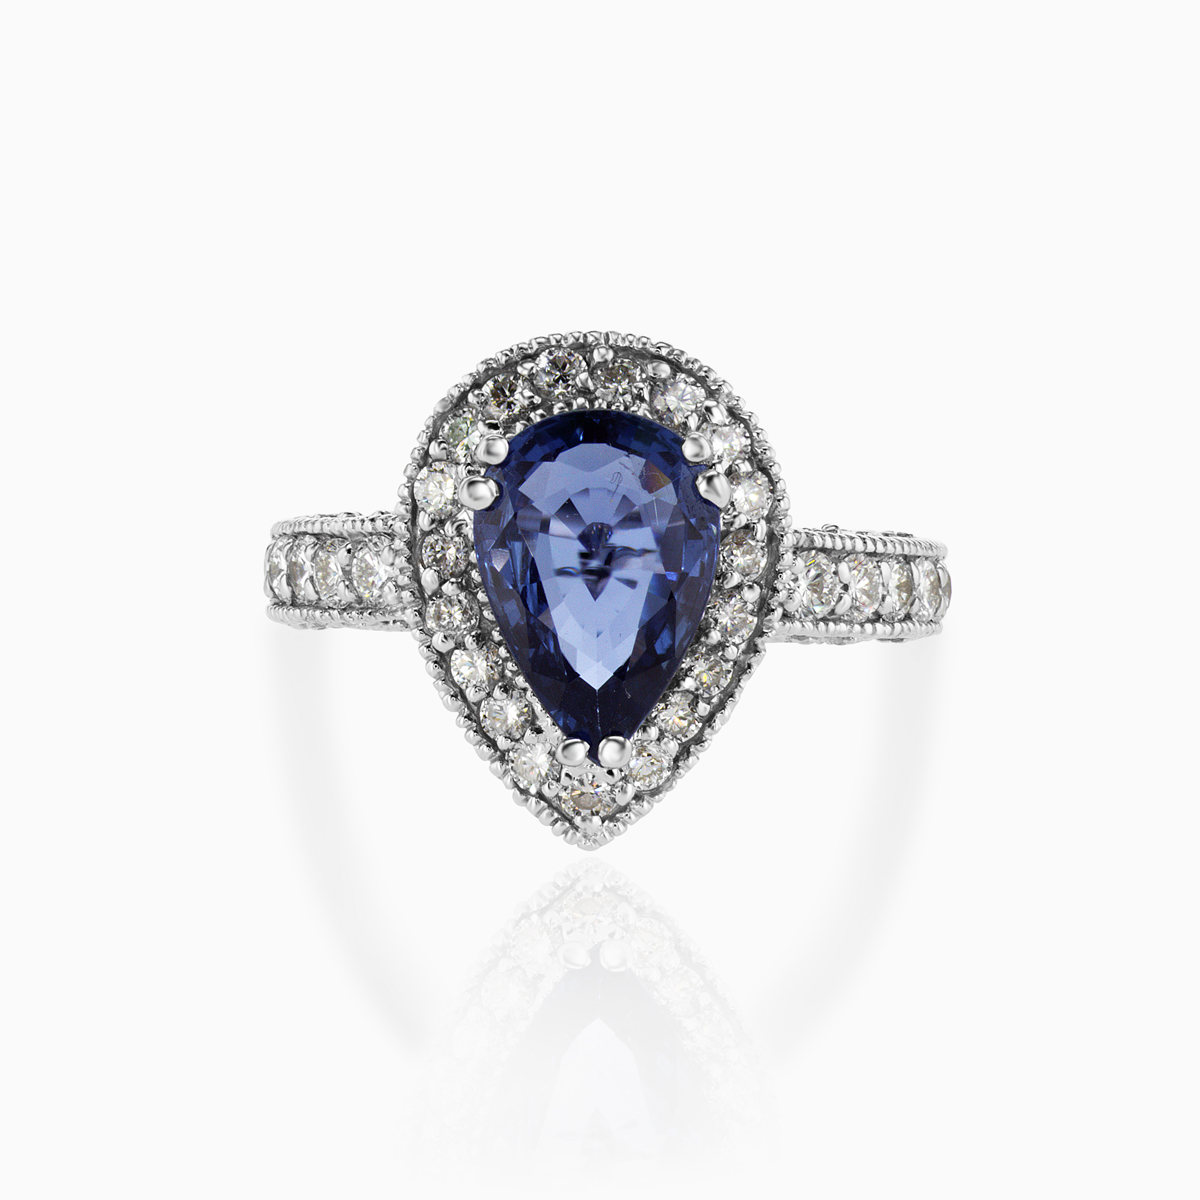 Pear-shaped Natural Blue Sapphire and Diamond Halo Engagement Ring